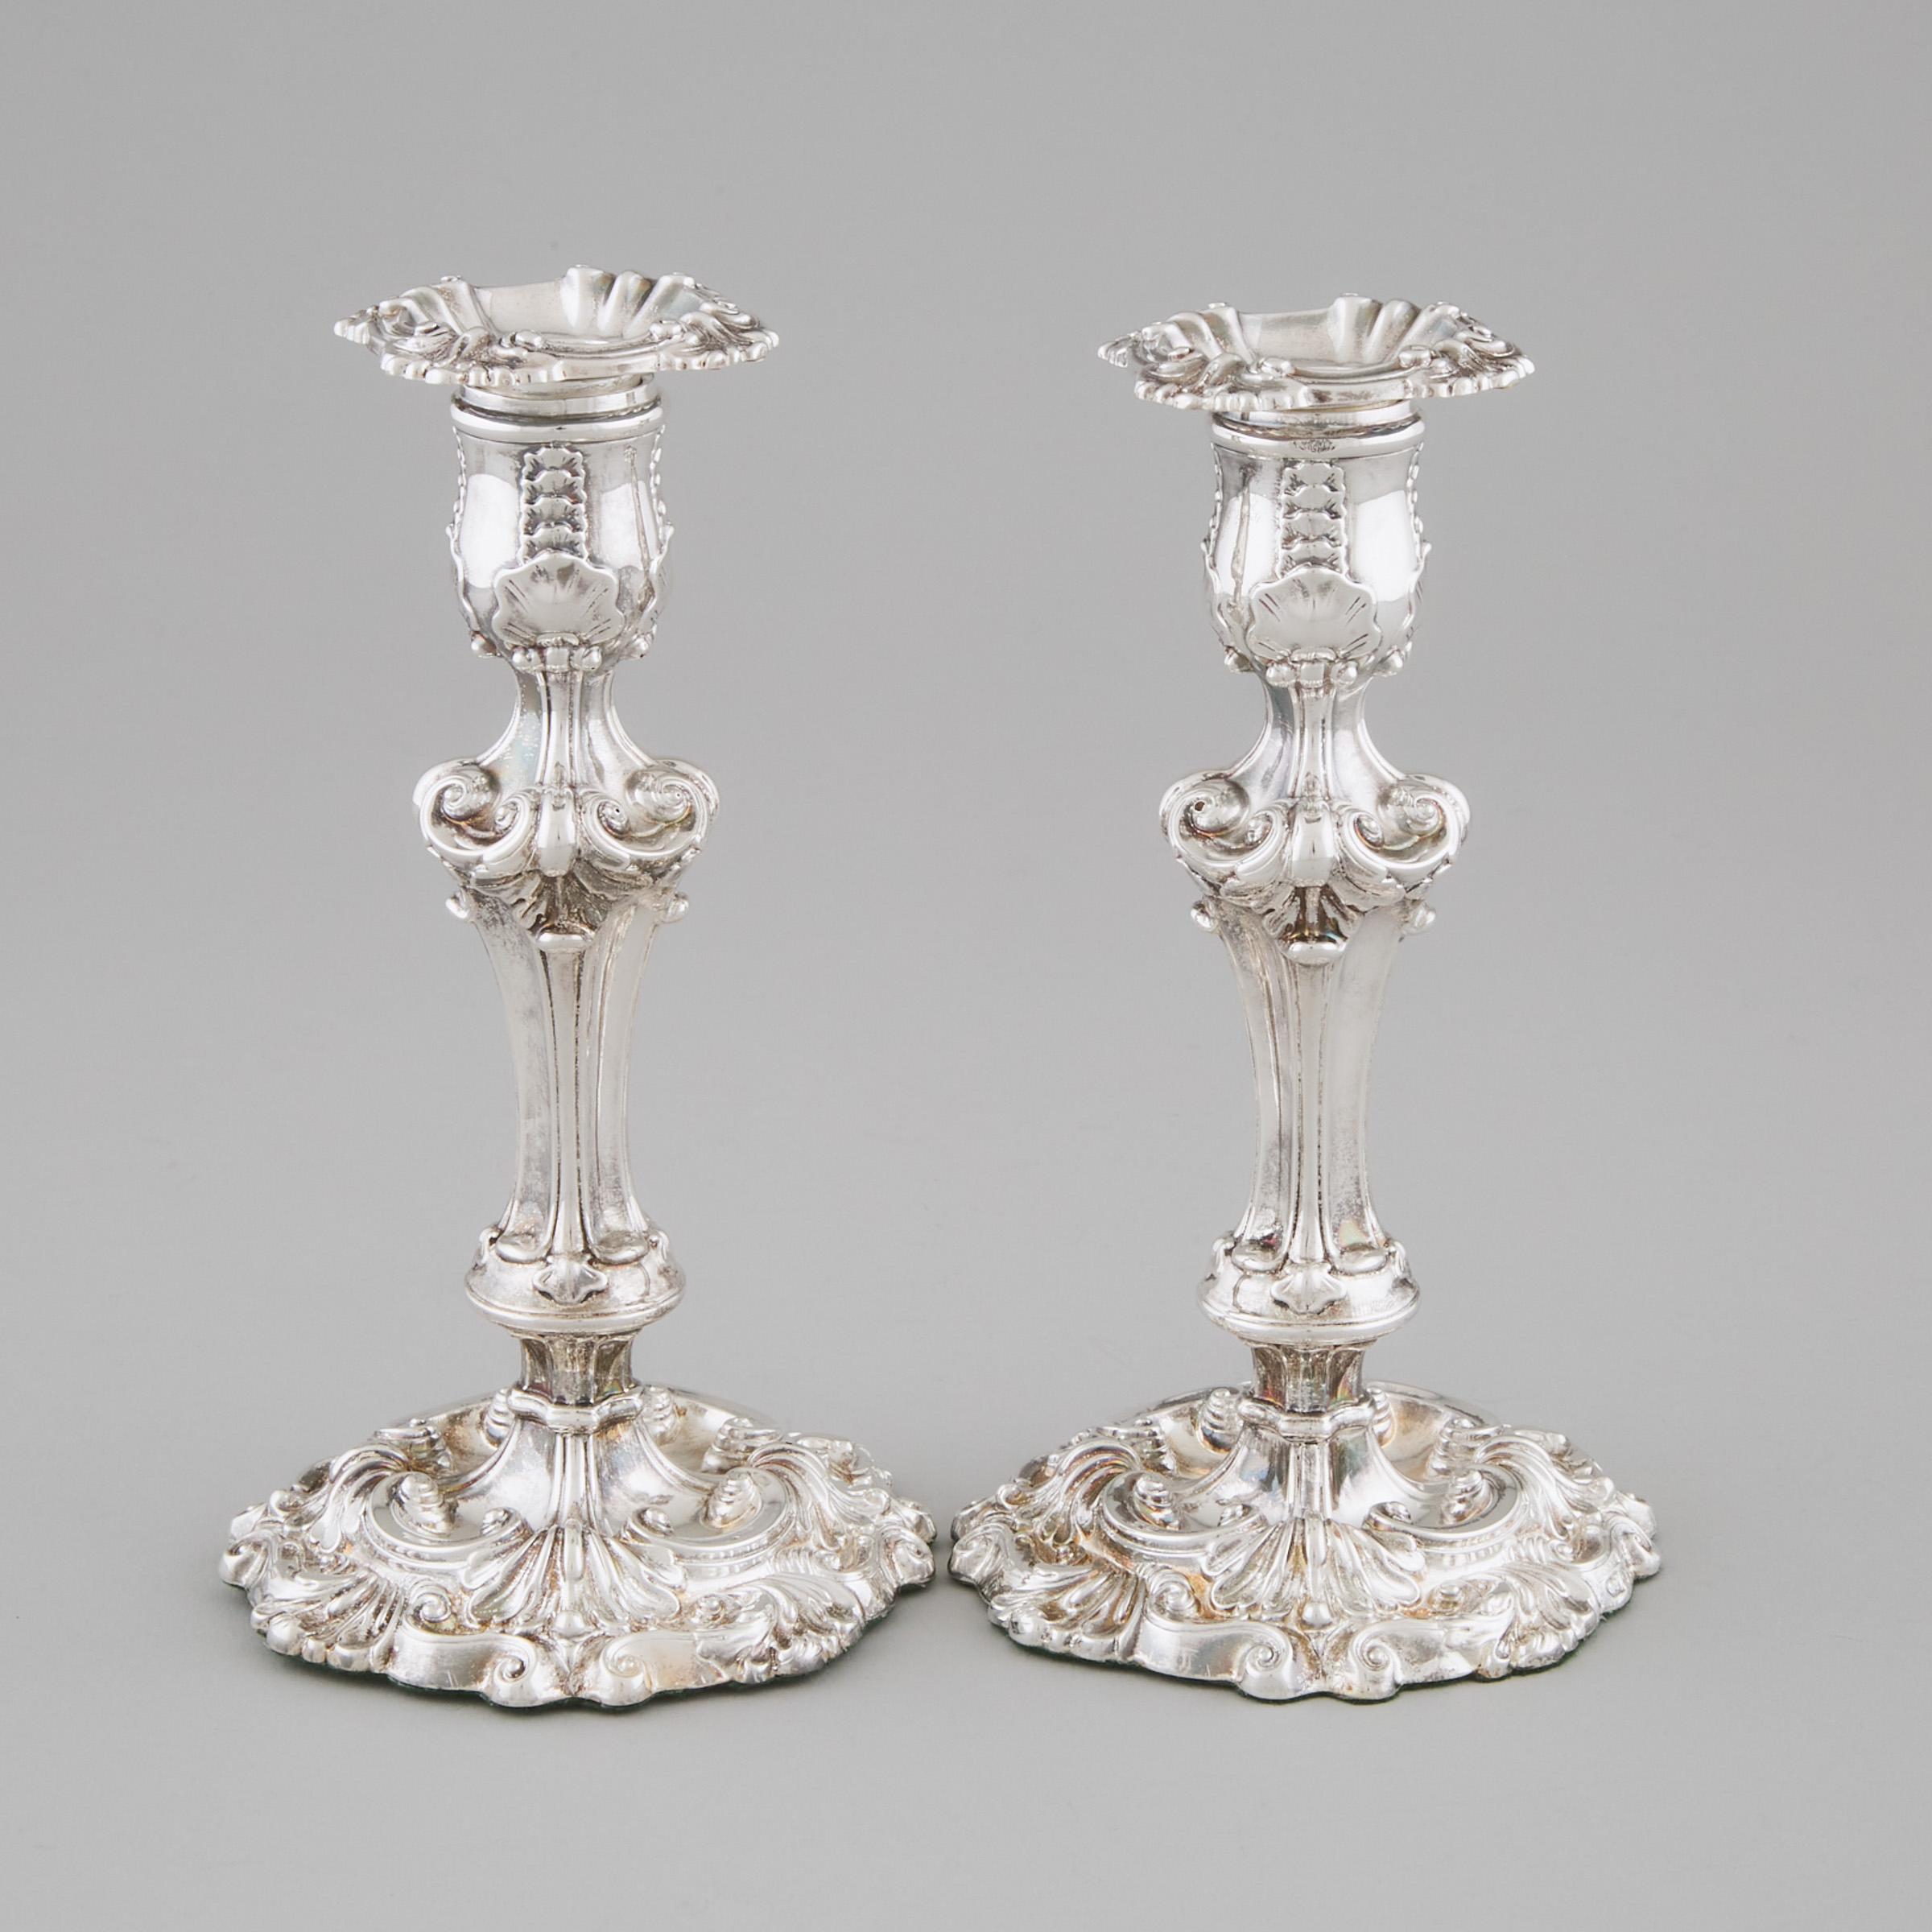 Pair of George III Silver Table Candlesticks, James Kirkby, Waterhouse & Co., Sheffield, 1814